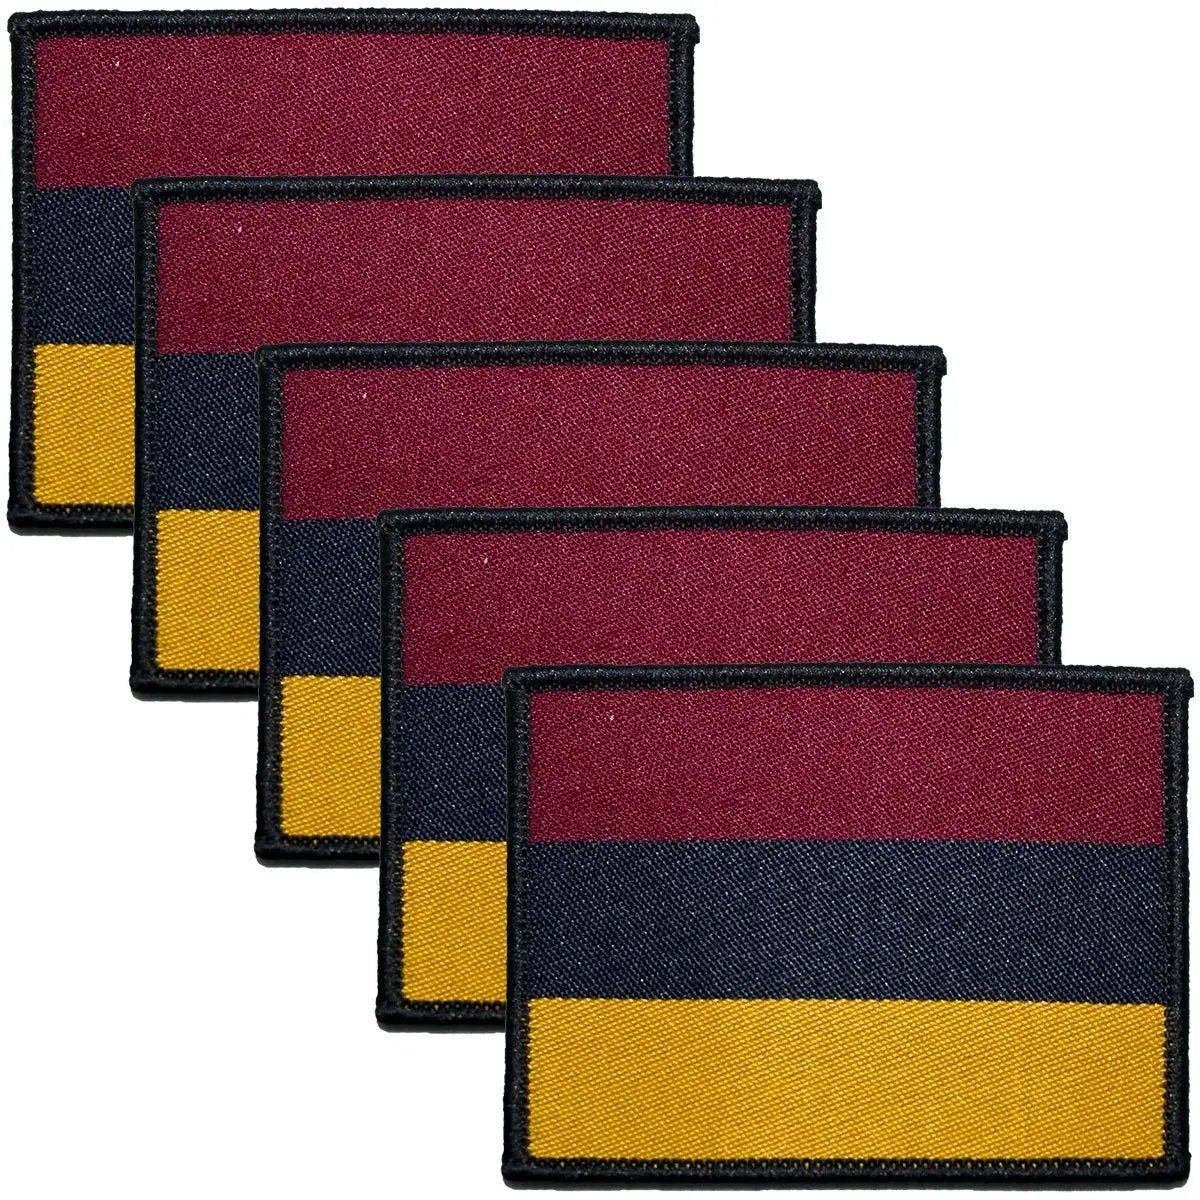 Royal Army Medical Corps TRF - Iron or Sewn On Patch - John Bull Clothing